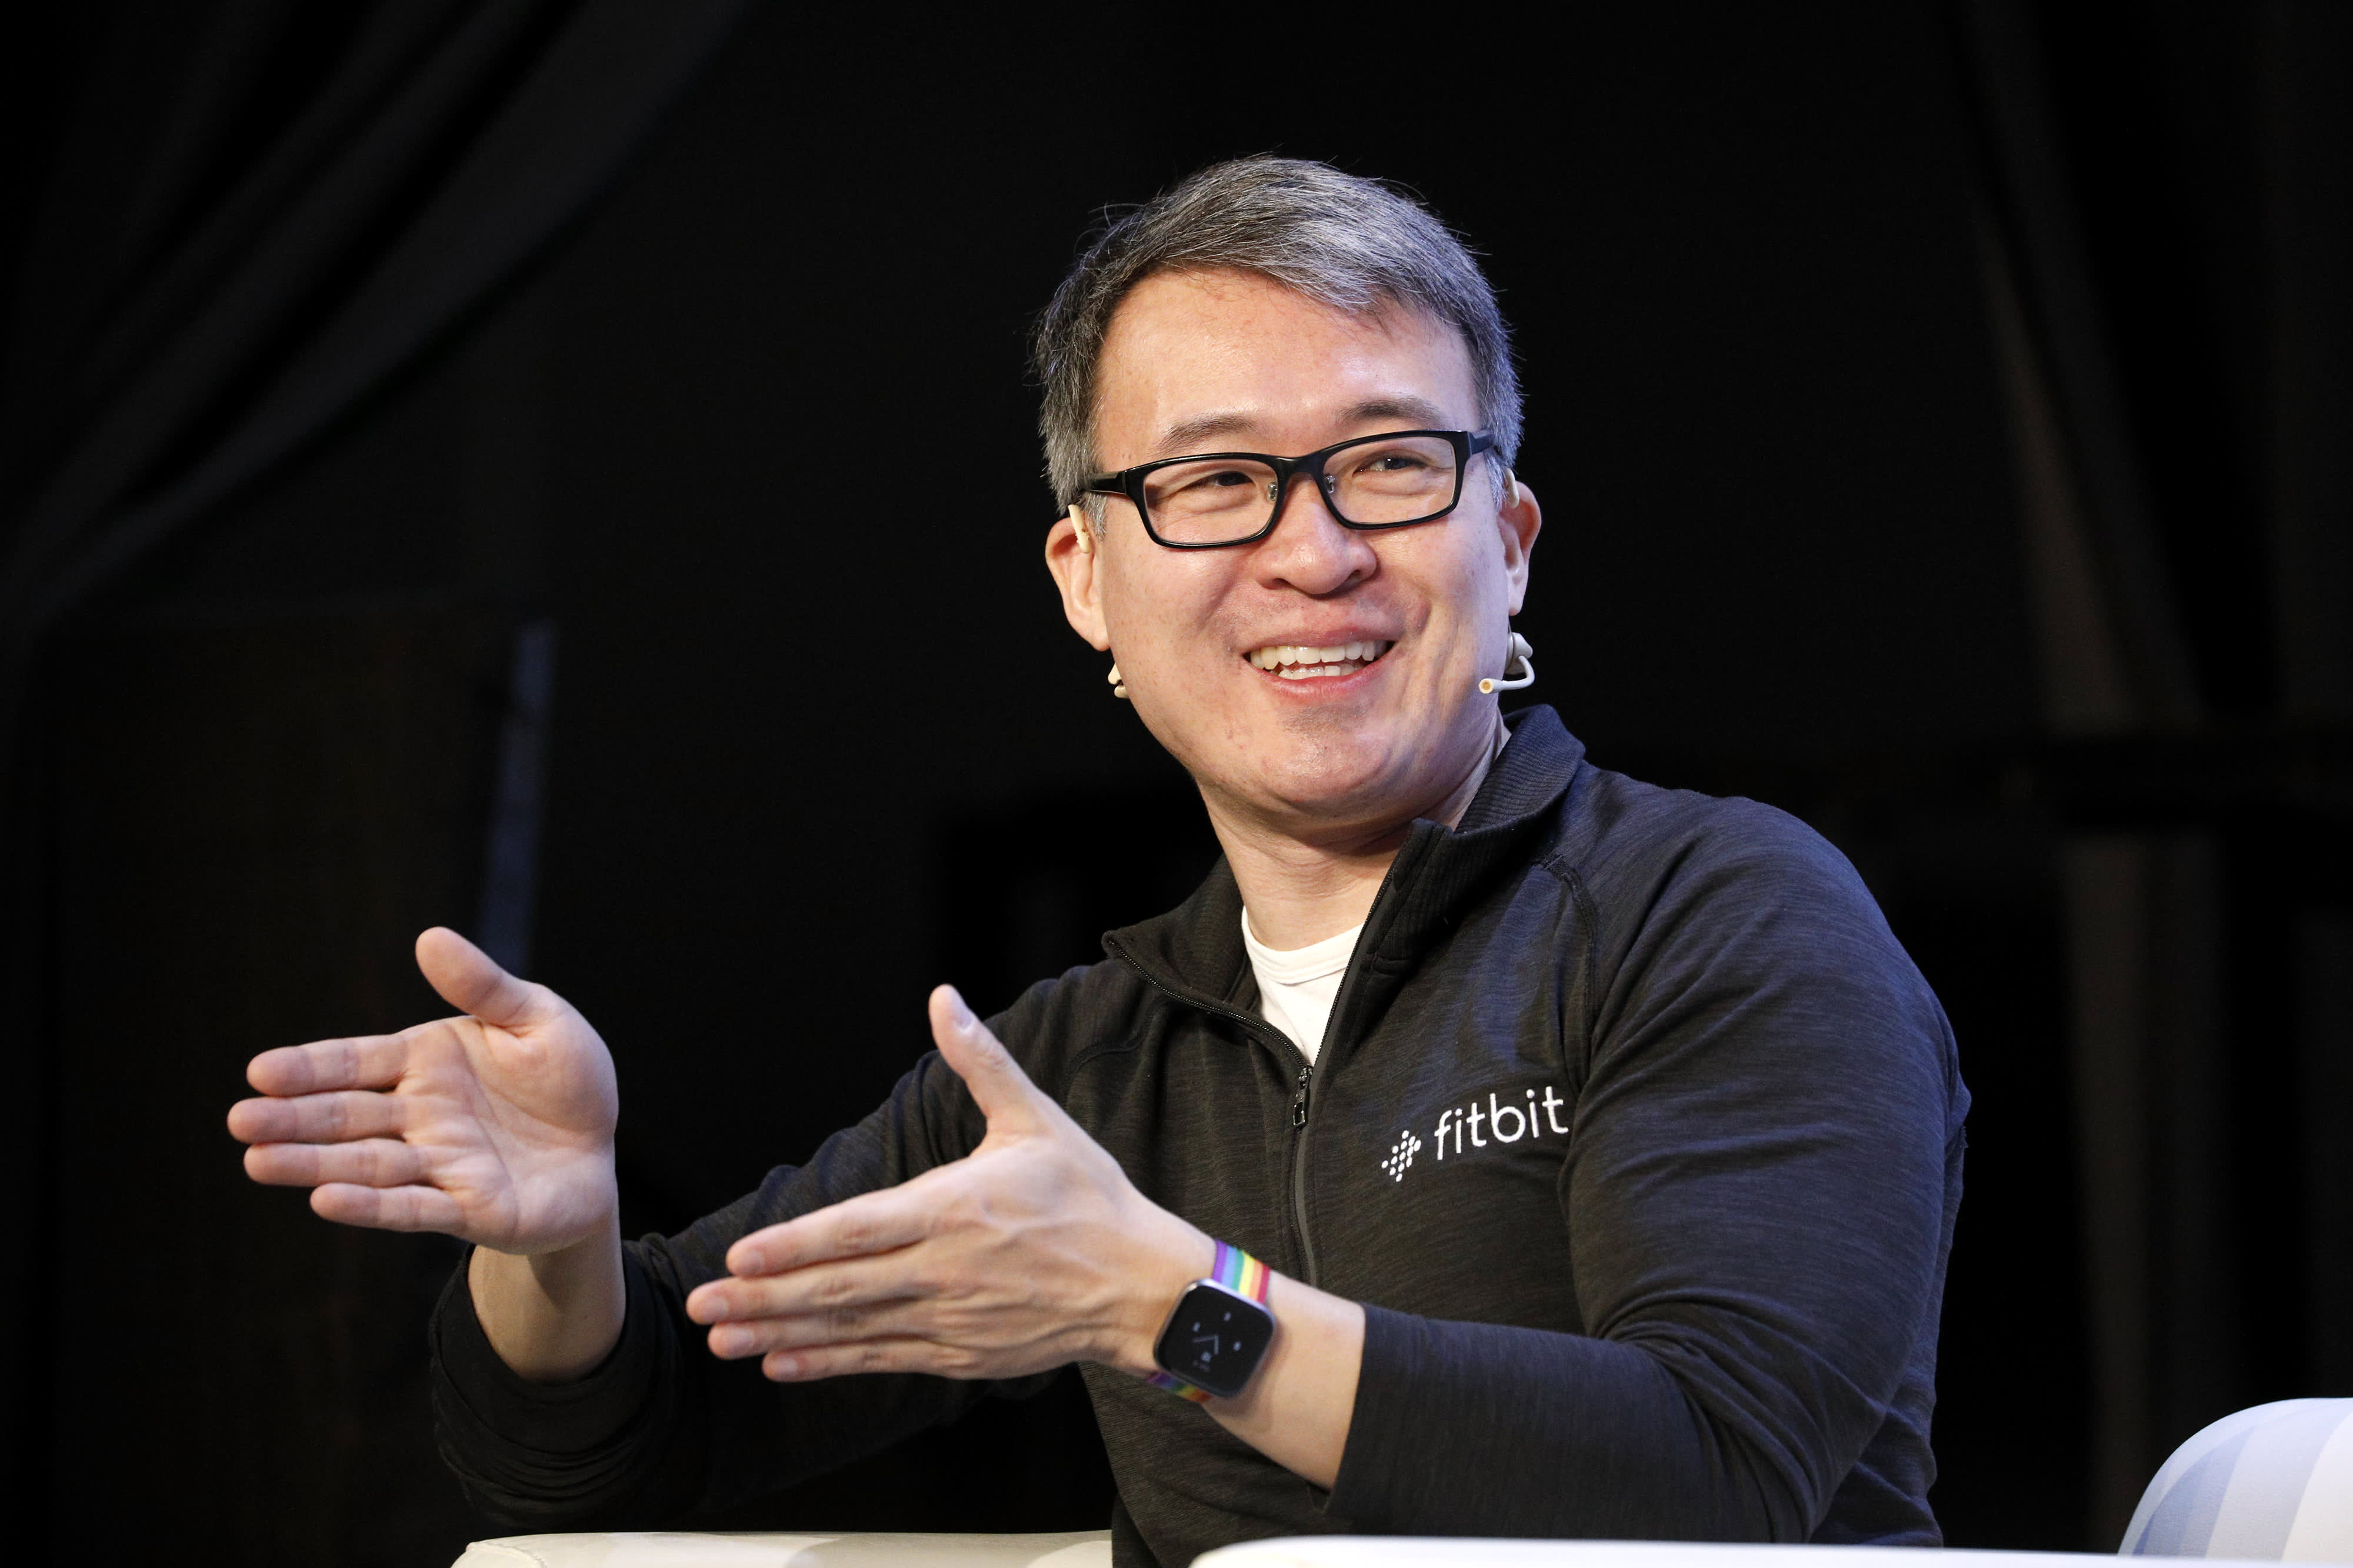 Fitbit CEO James Park on habits, achieving success and sale to Google